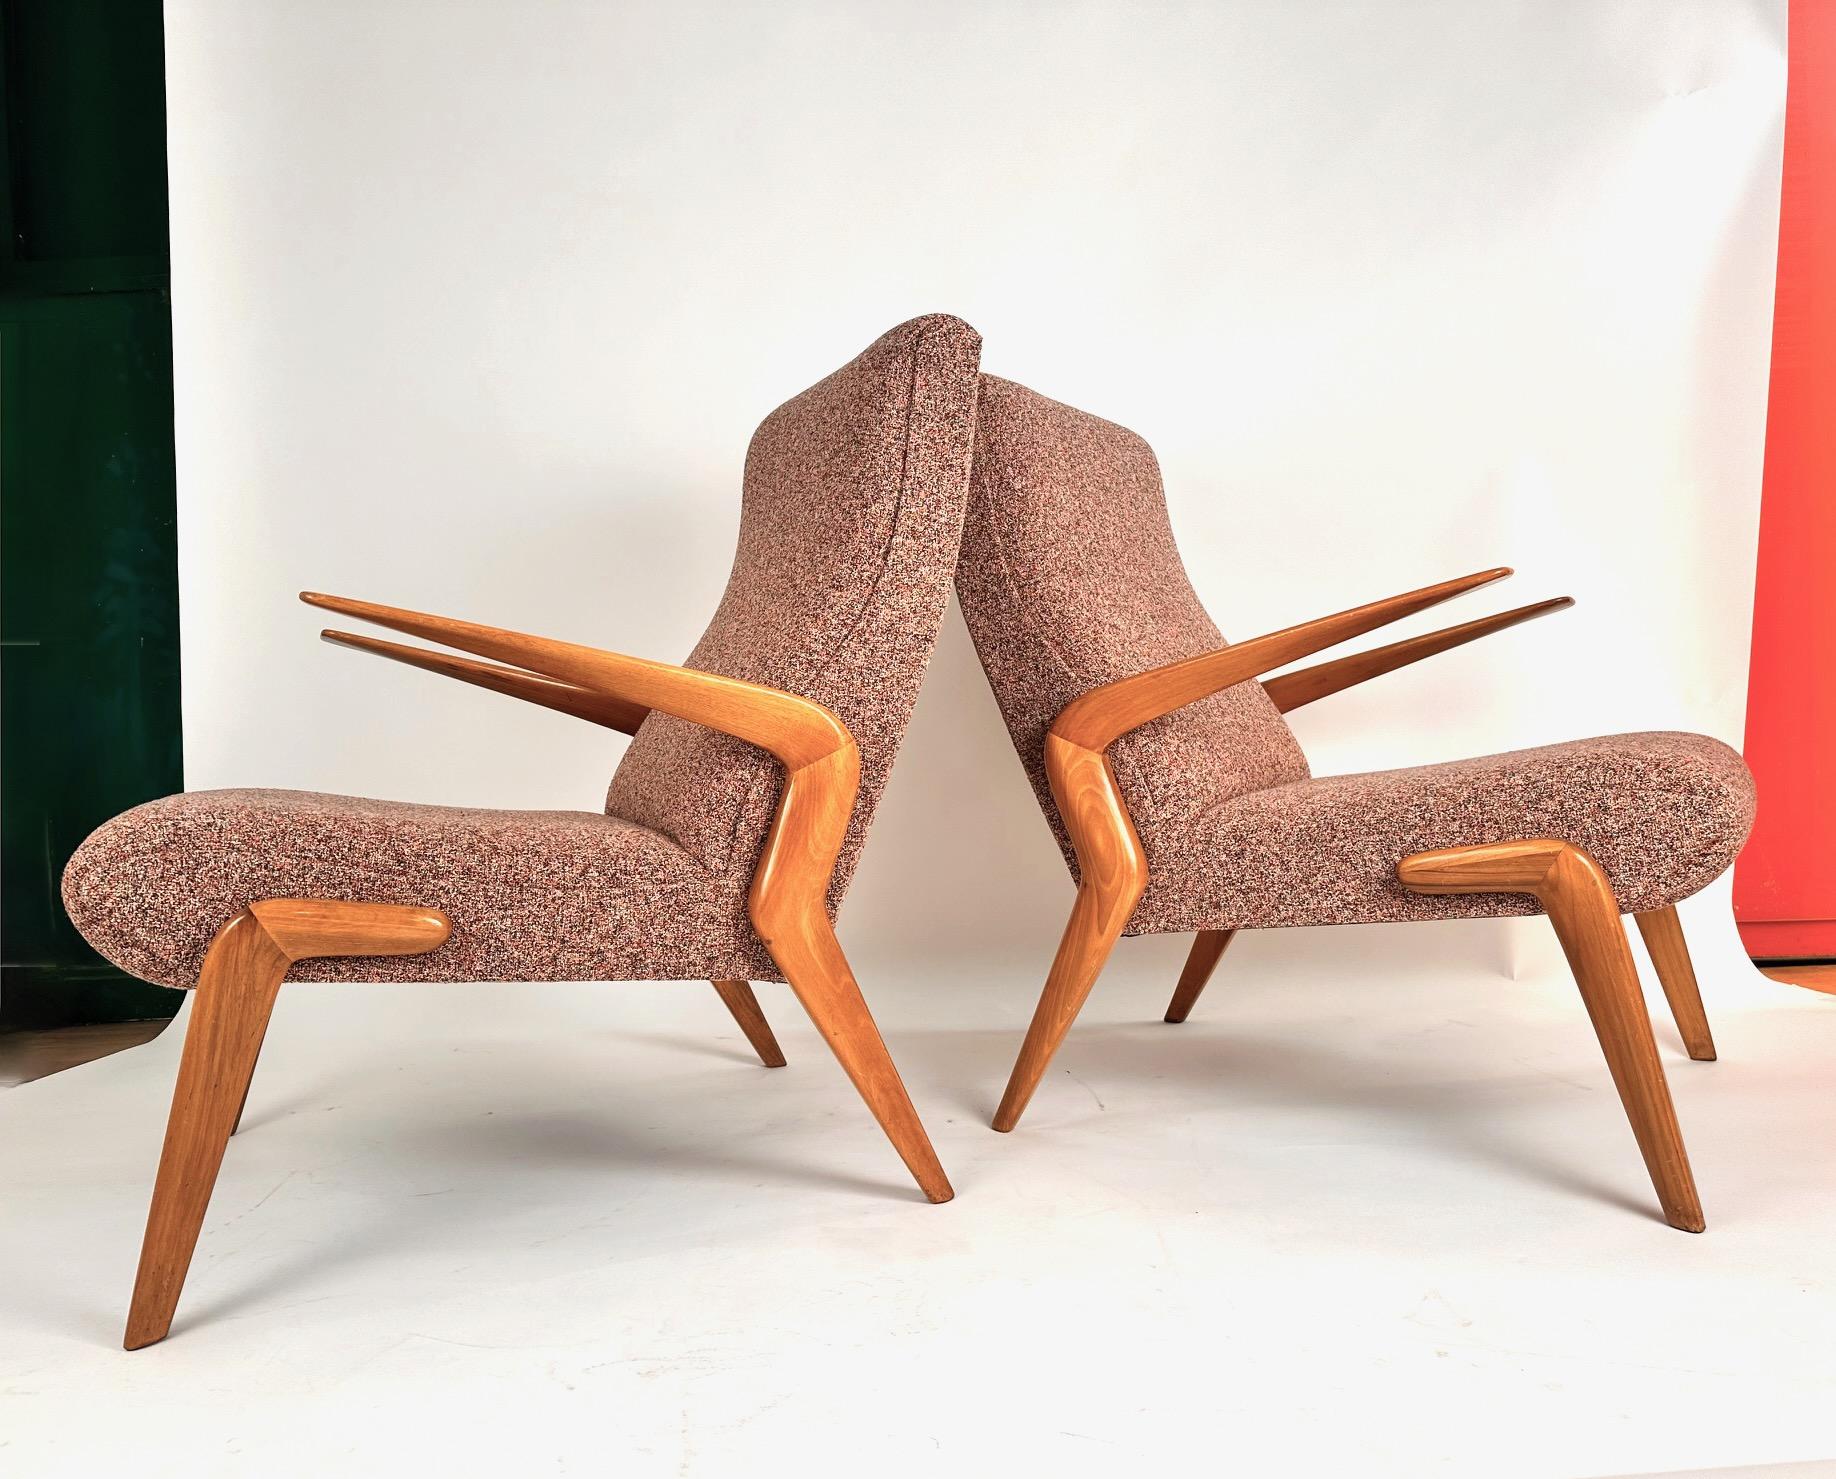 An original pair of P71 walnut armchairs designed by Osvaldo Borsani and  one of the first editions of  Tecno.,founded in 1953 by Osvaldo Borsani and his brother Fulgencio Borsani. Walnut wood and bouclé upholstery..Sculptured legs ,and solid